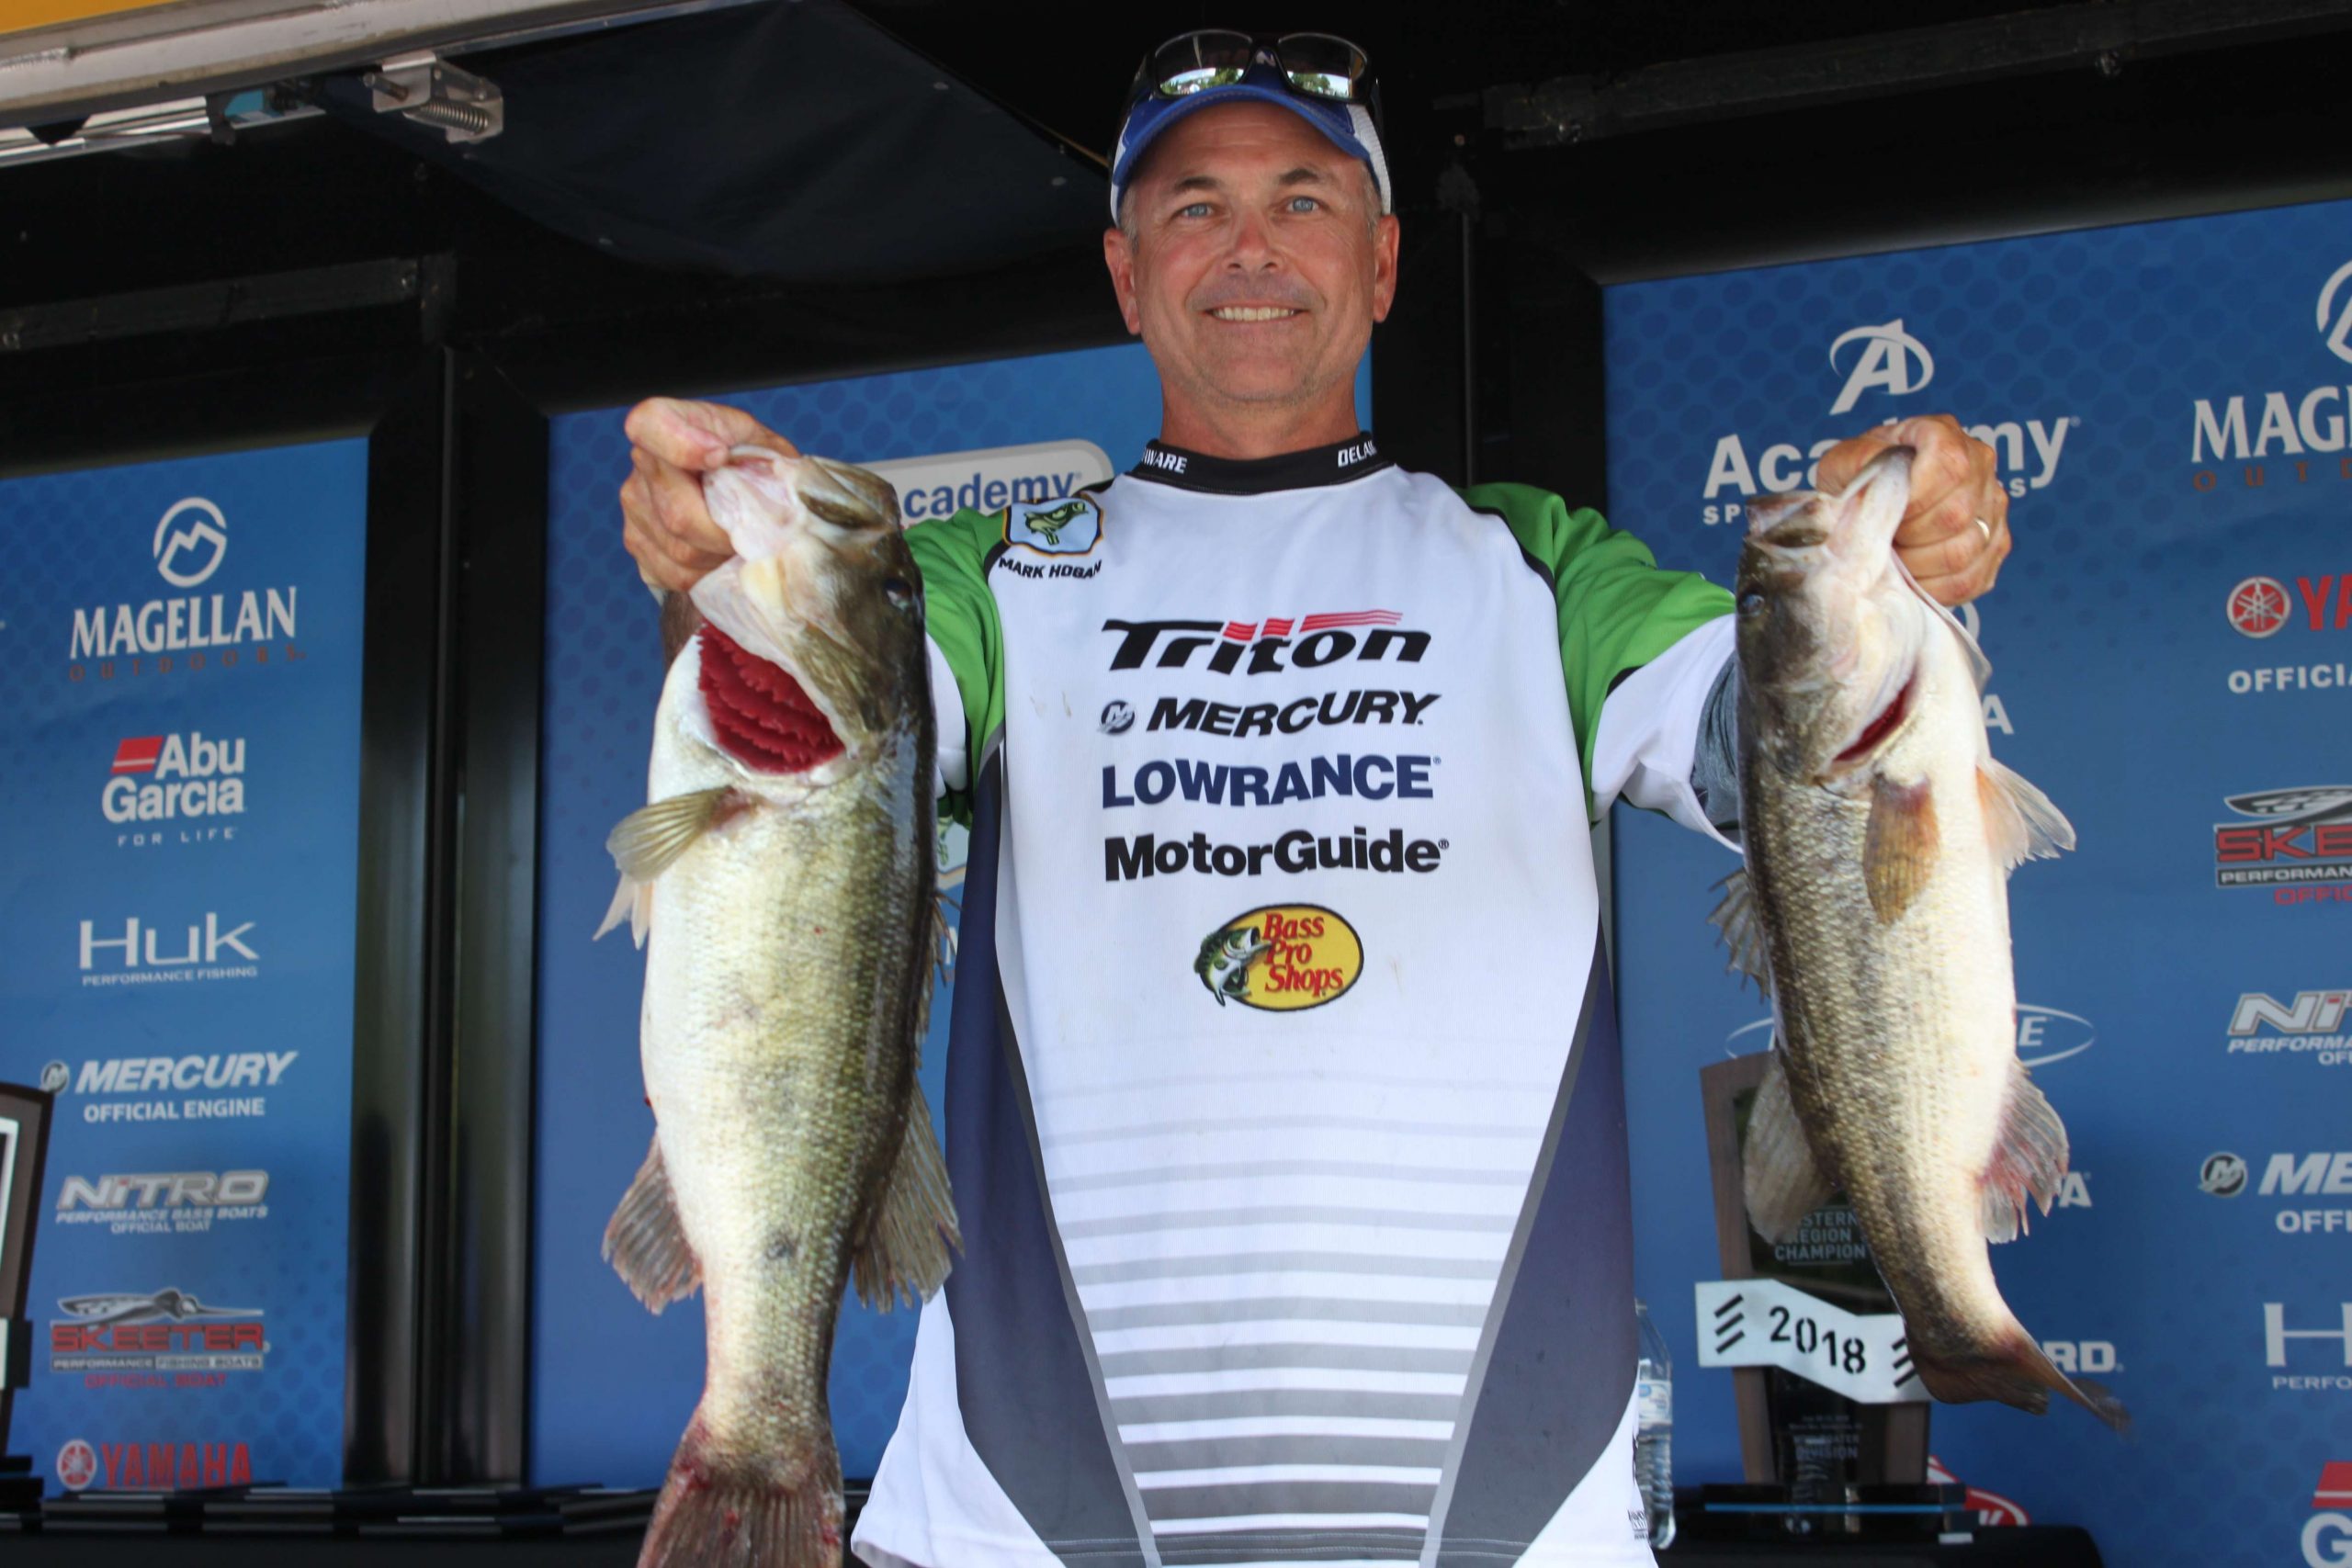 And how about Mark Hogan? Fresh off winning a team championship with Team Delaware a day earlier, Hogan is all smiles Friday with a tournament best 15-9 limit. That gave him a 31-15 total for the tournament. The fish on the left weighed 5-4.